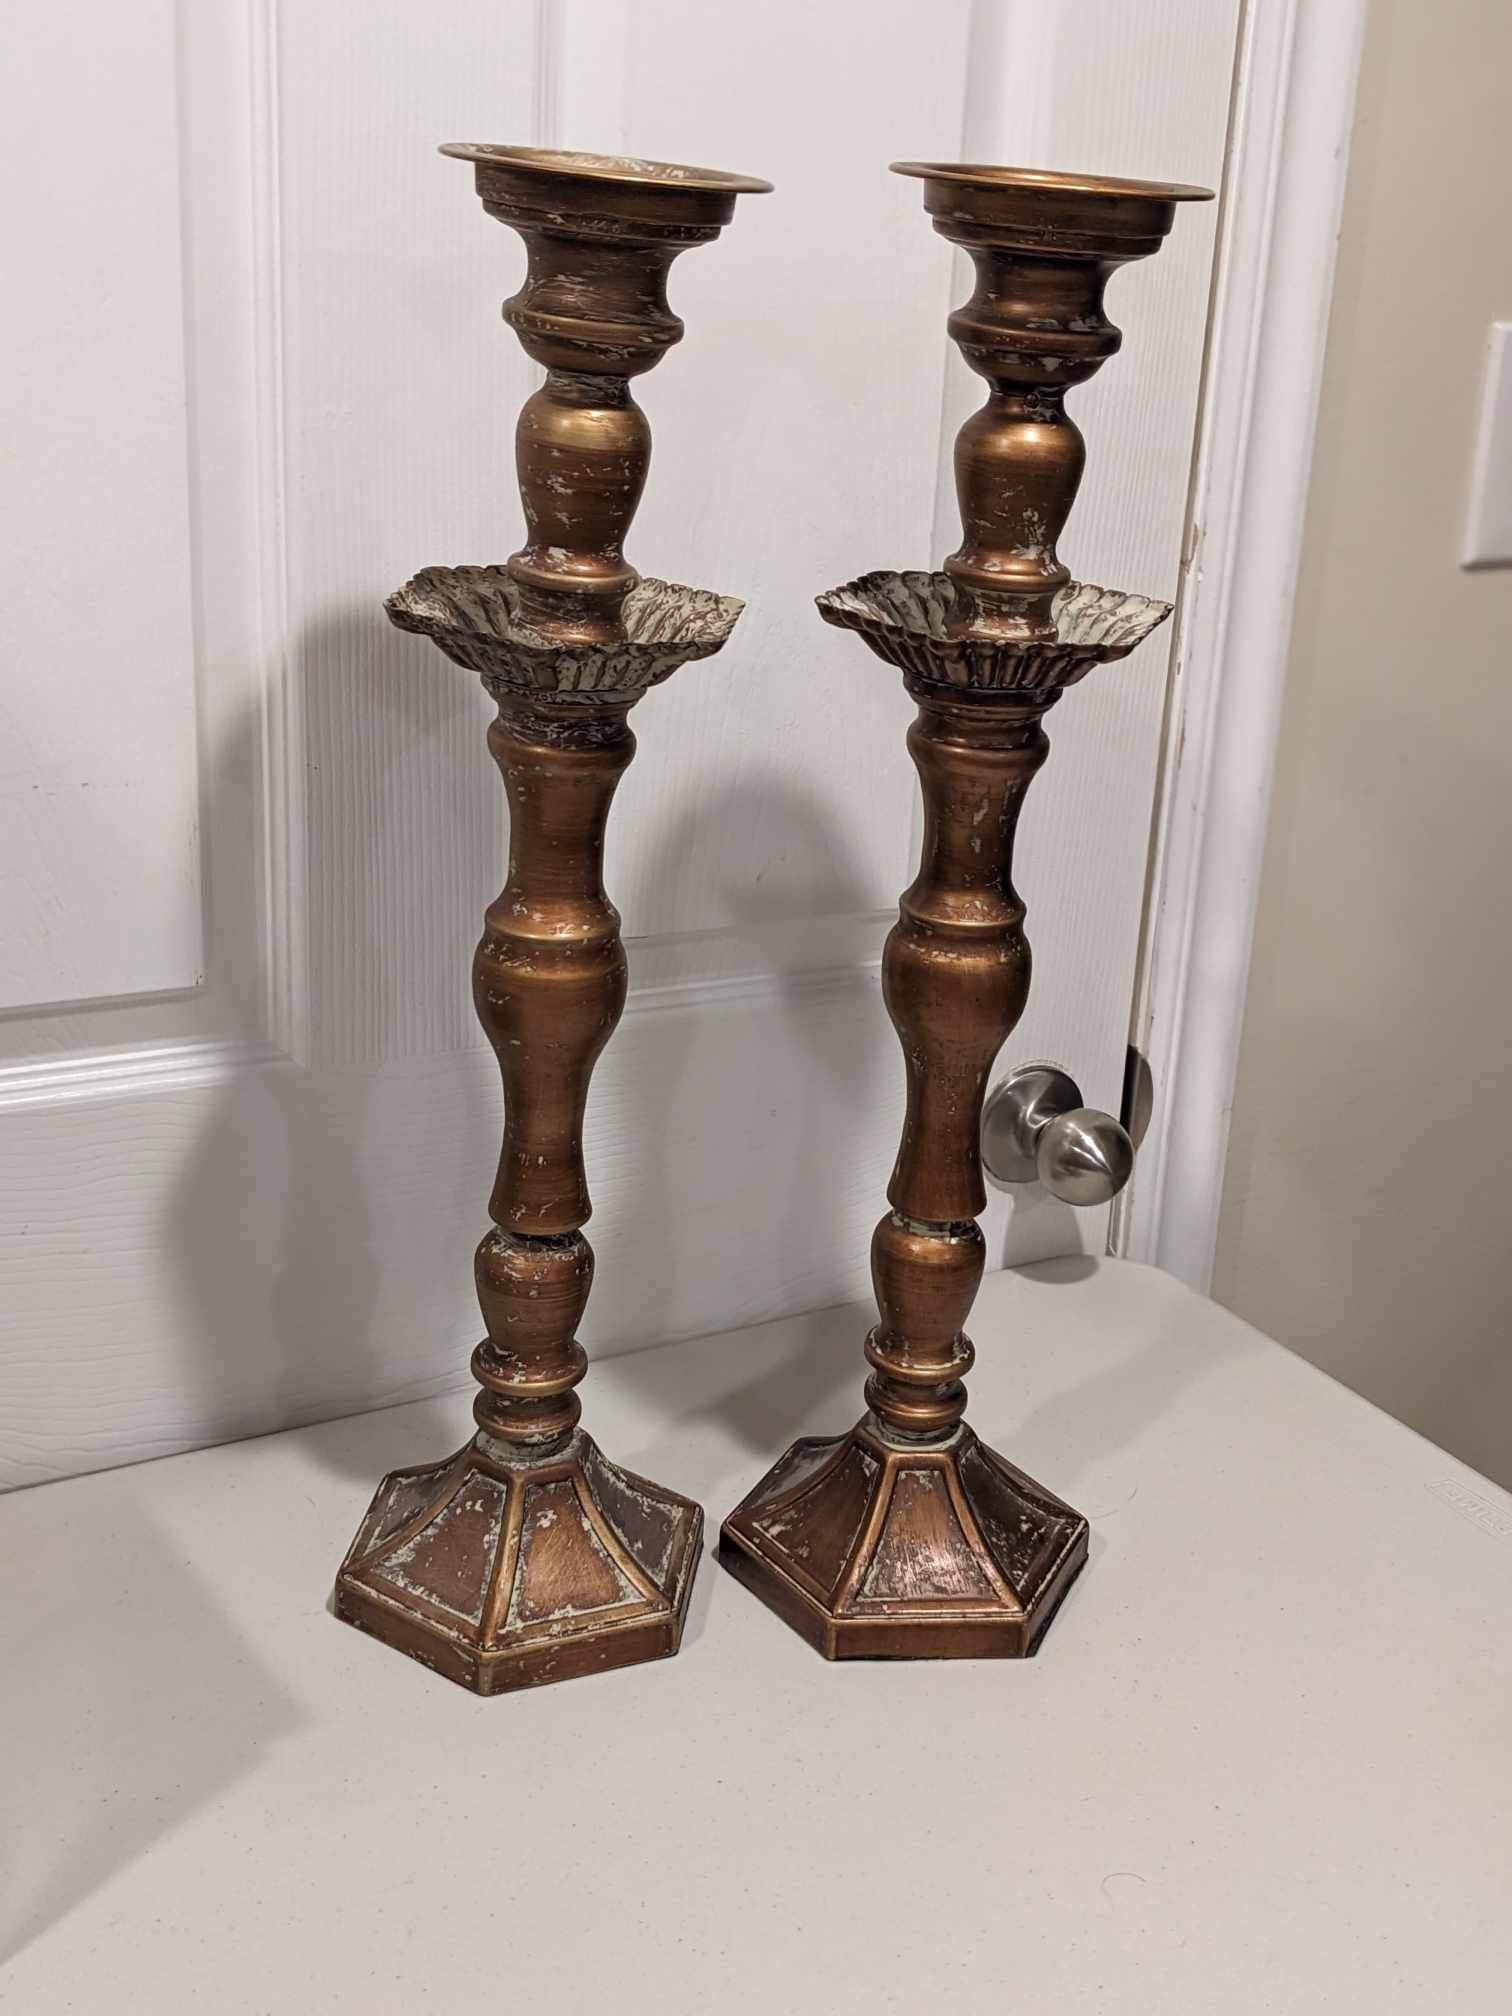 Incredible Pair Of Tall Distressed Bronze Pillar Candle Holders!